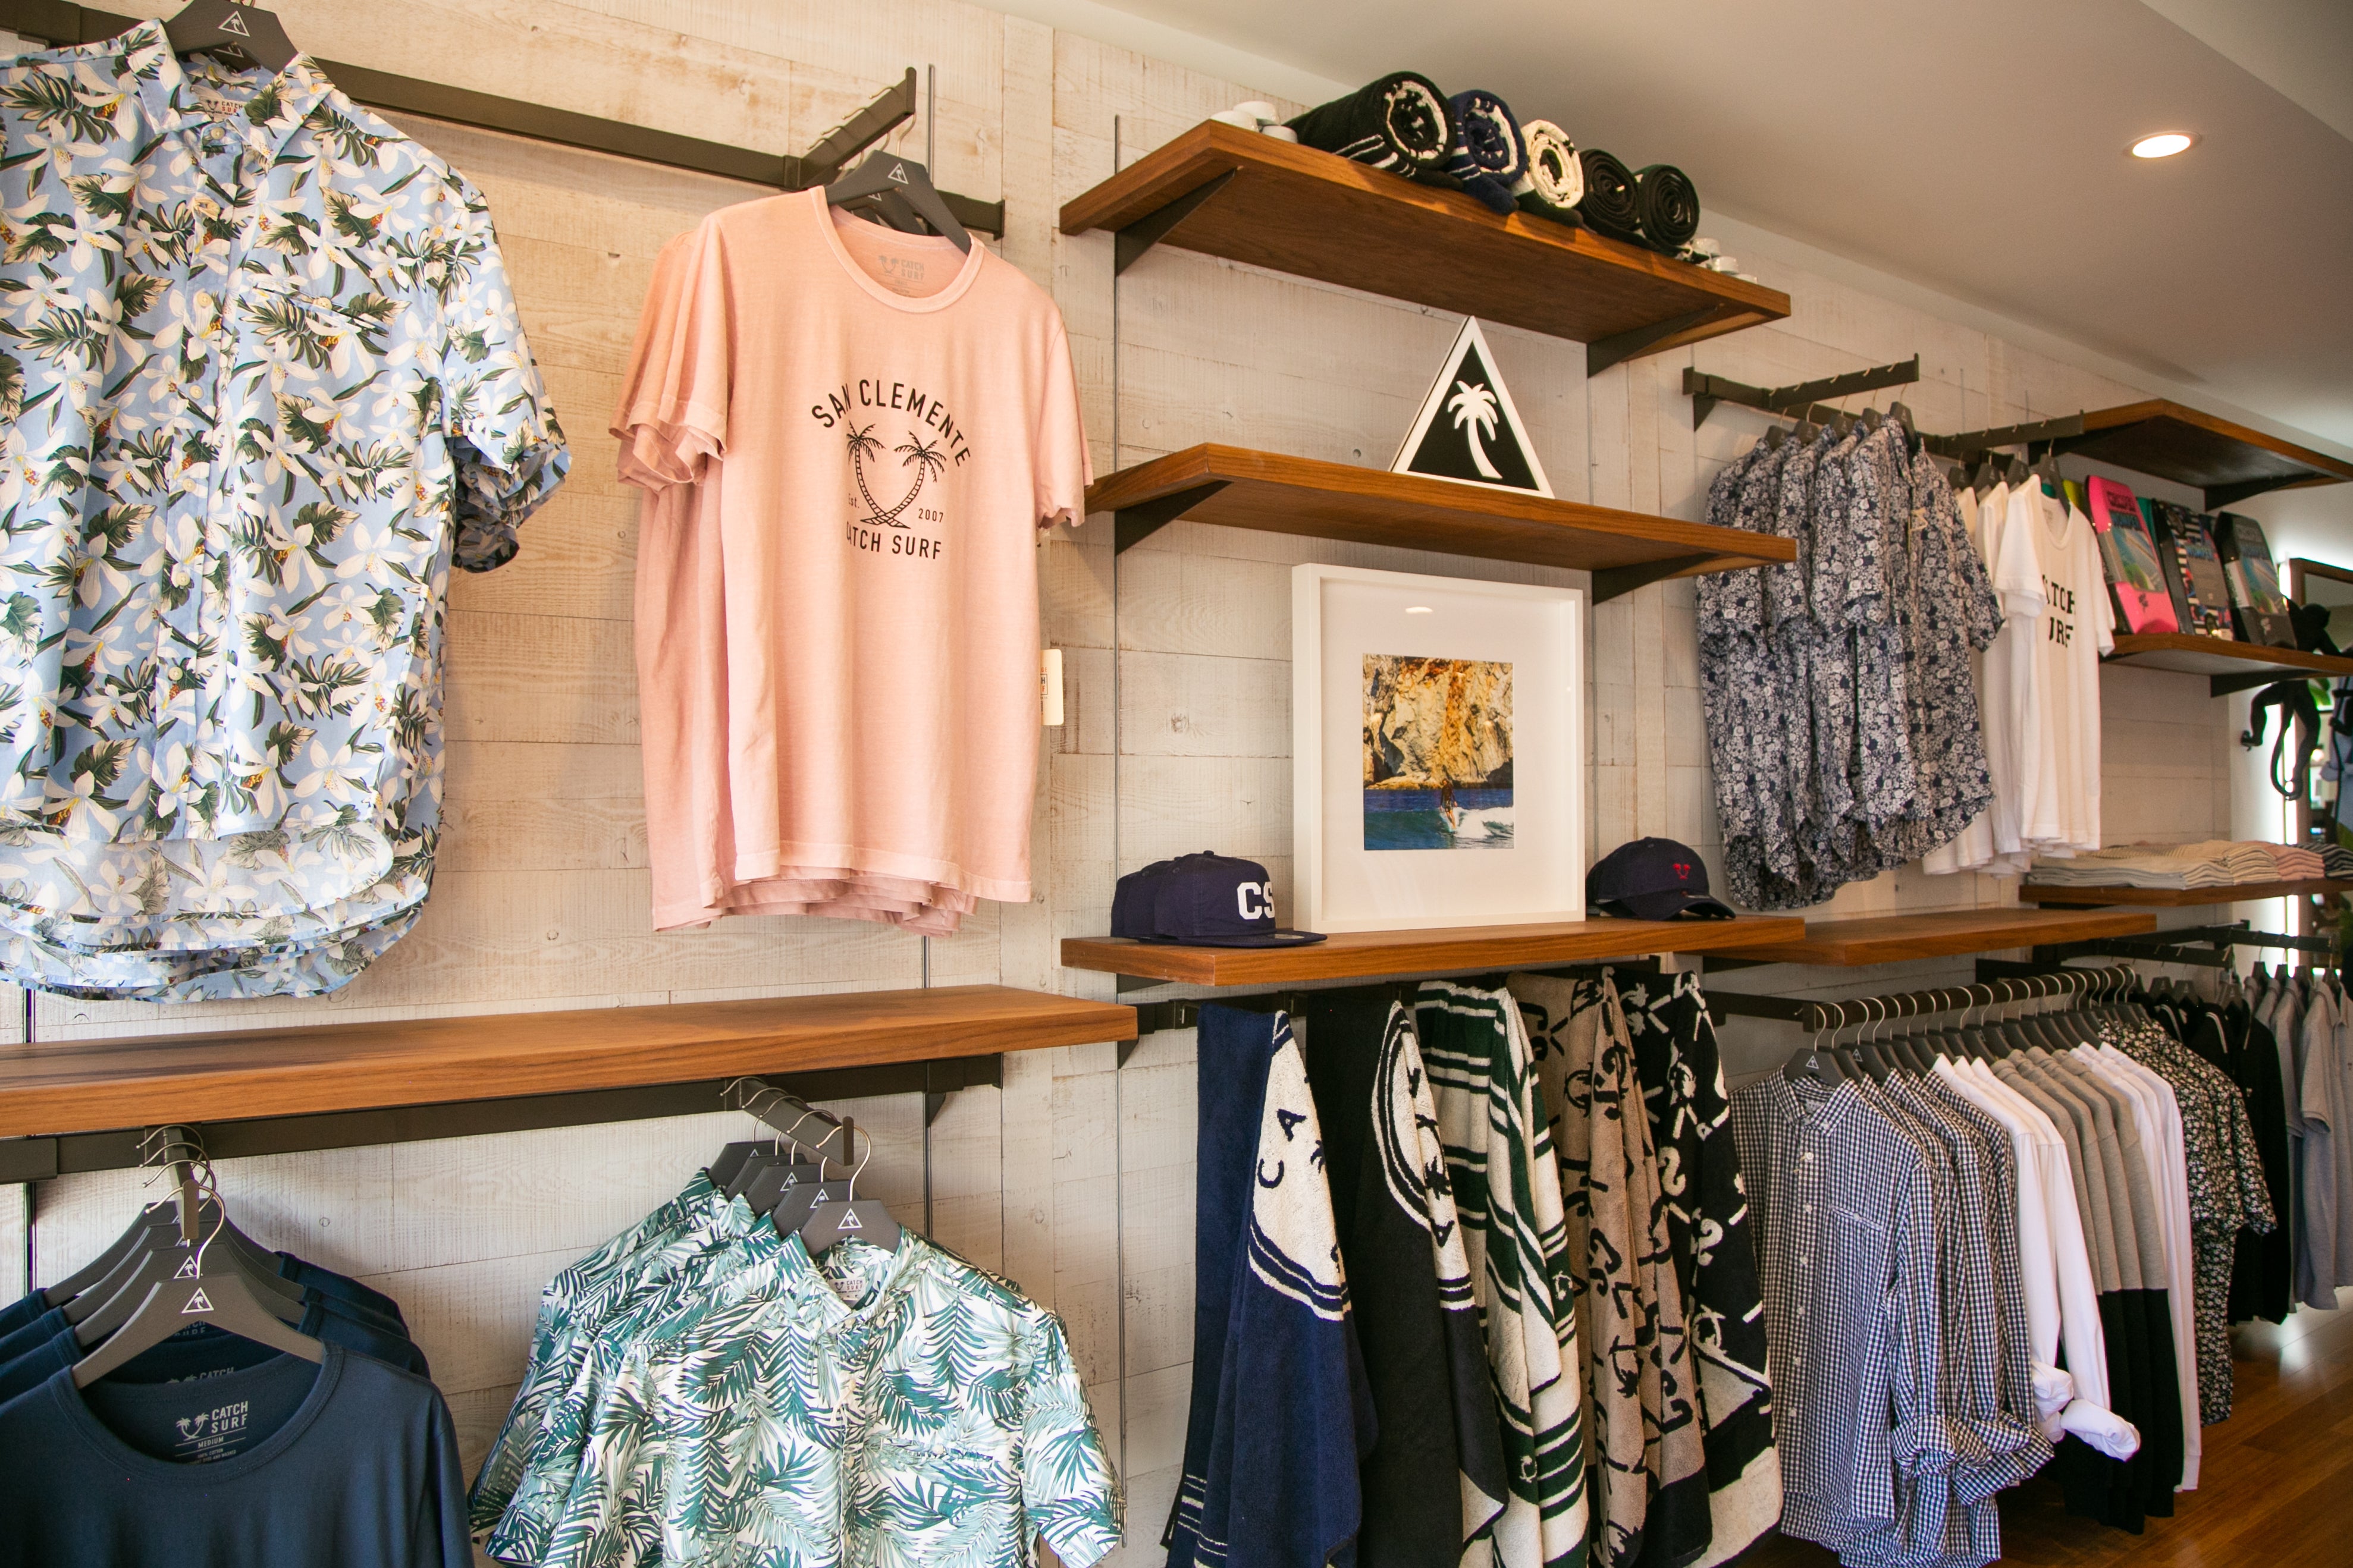 San Clemente Store – Catch Surf USA